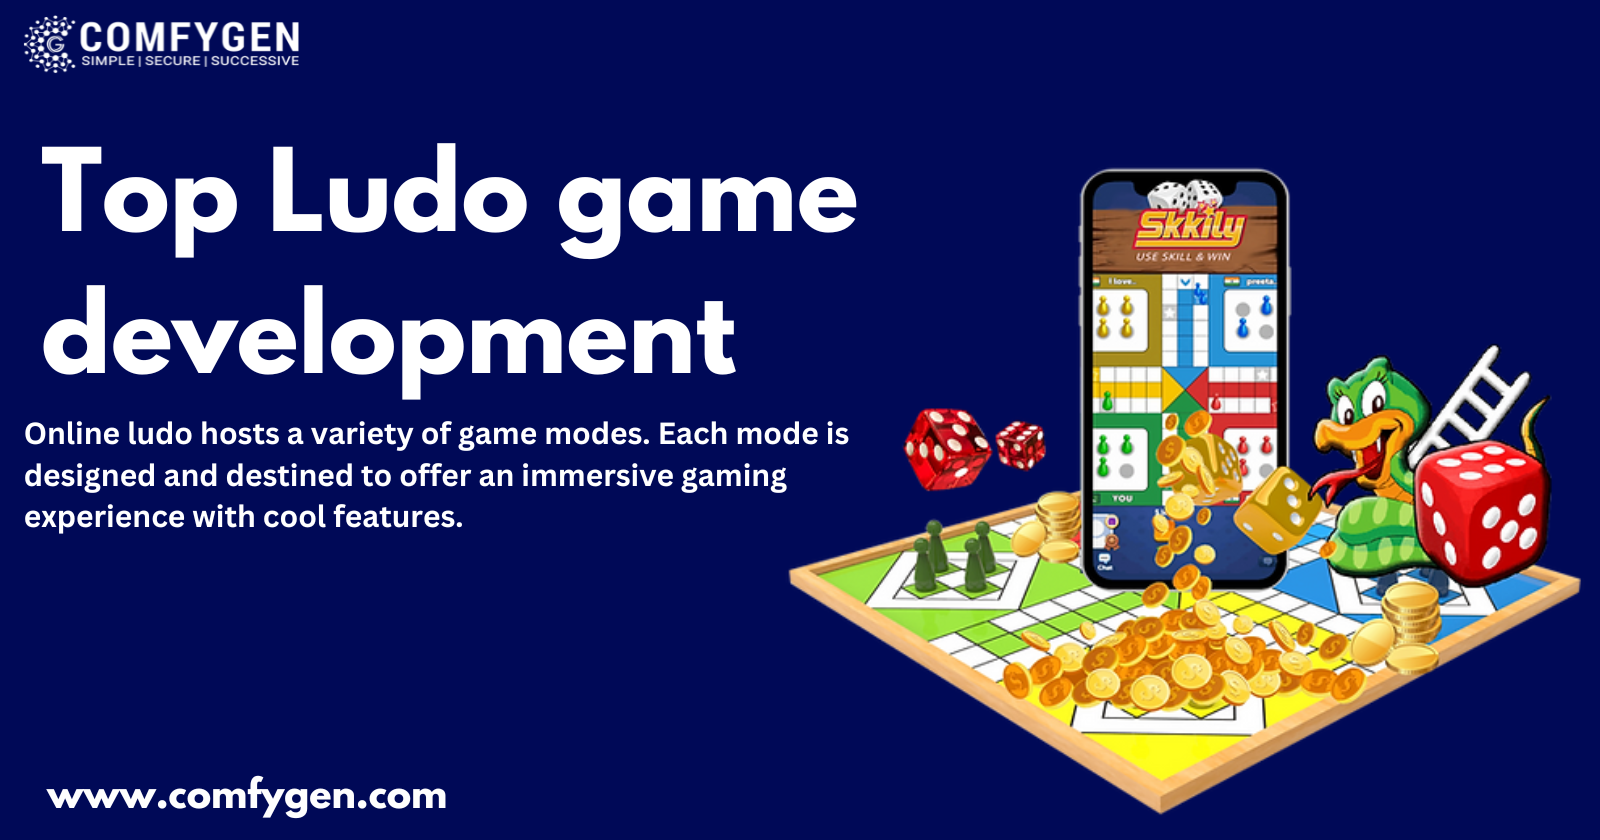 COMFYGEN

TOE Er

Top Ludo game
development

Online ludo hosts a variety of game modes. Each mode is
designed and destined to offer an immersive gaming
experience with cool features.

   
 

~
ZA
ITS Nf
-

www.comfygen.com